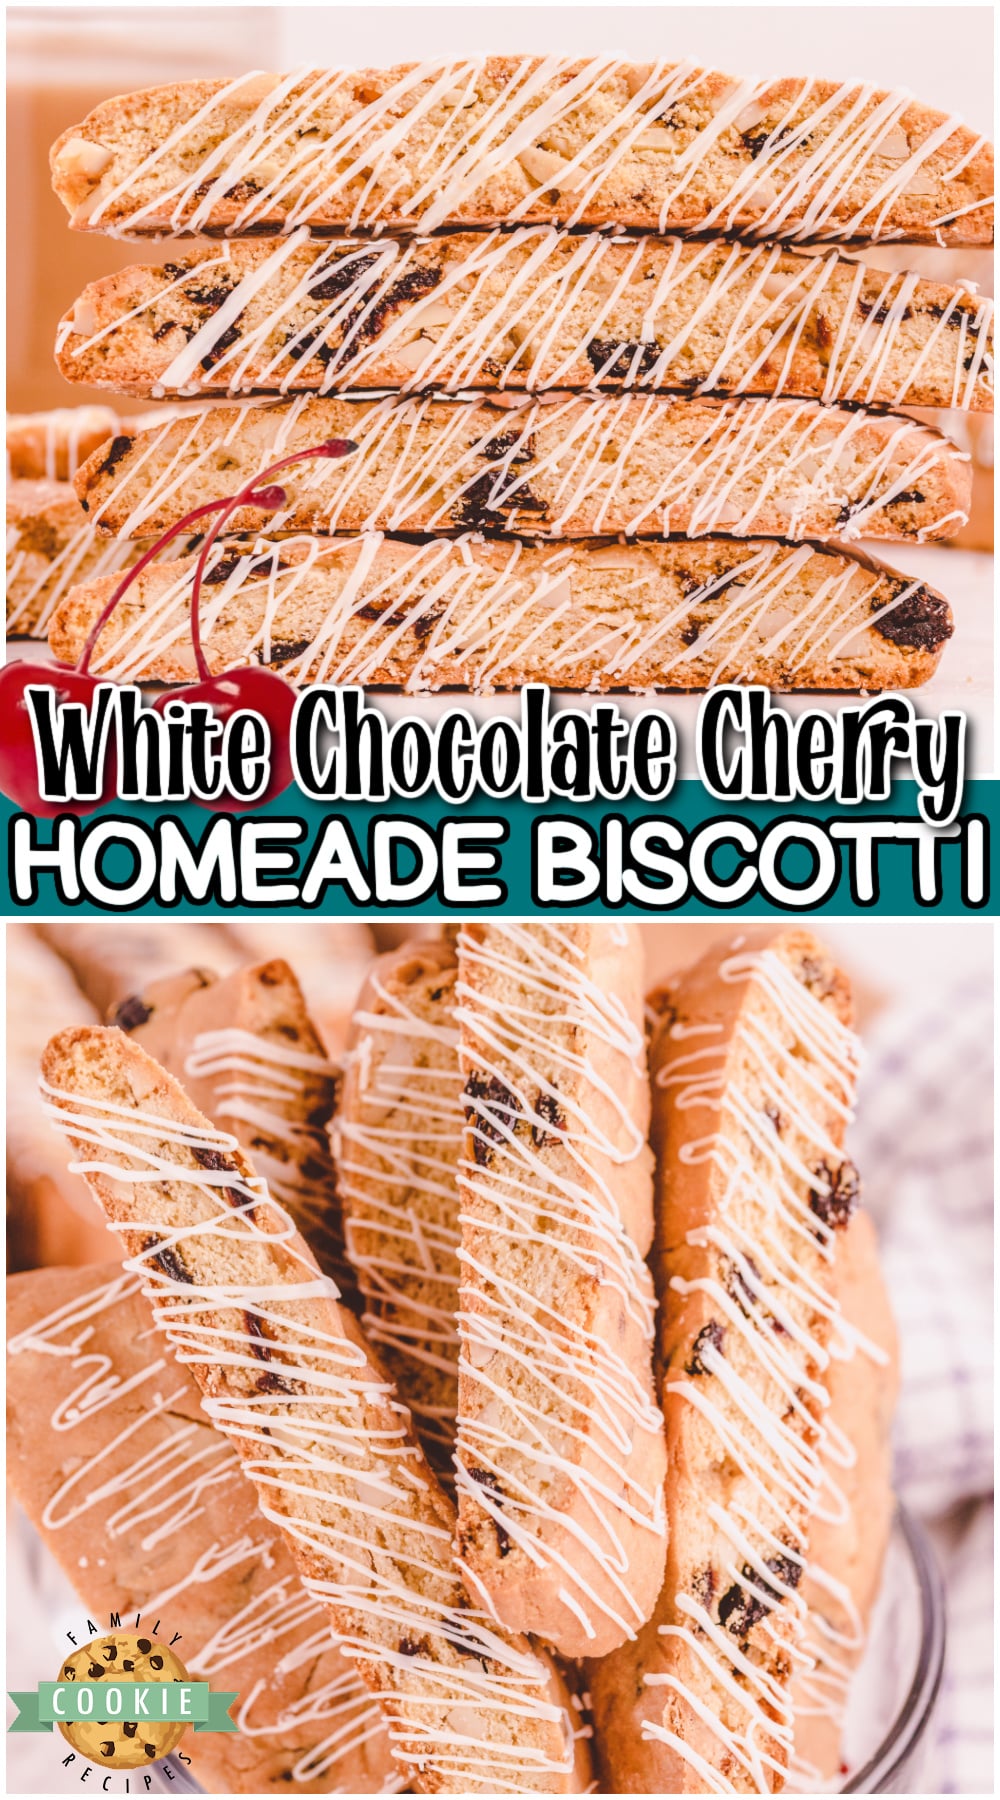 Made with dried cherries & slivered almonds, this homemade cherry biscotti recipe feels fancy and indulgent. Perfect treat for your morning coffee or tea! via @buttergirls